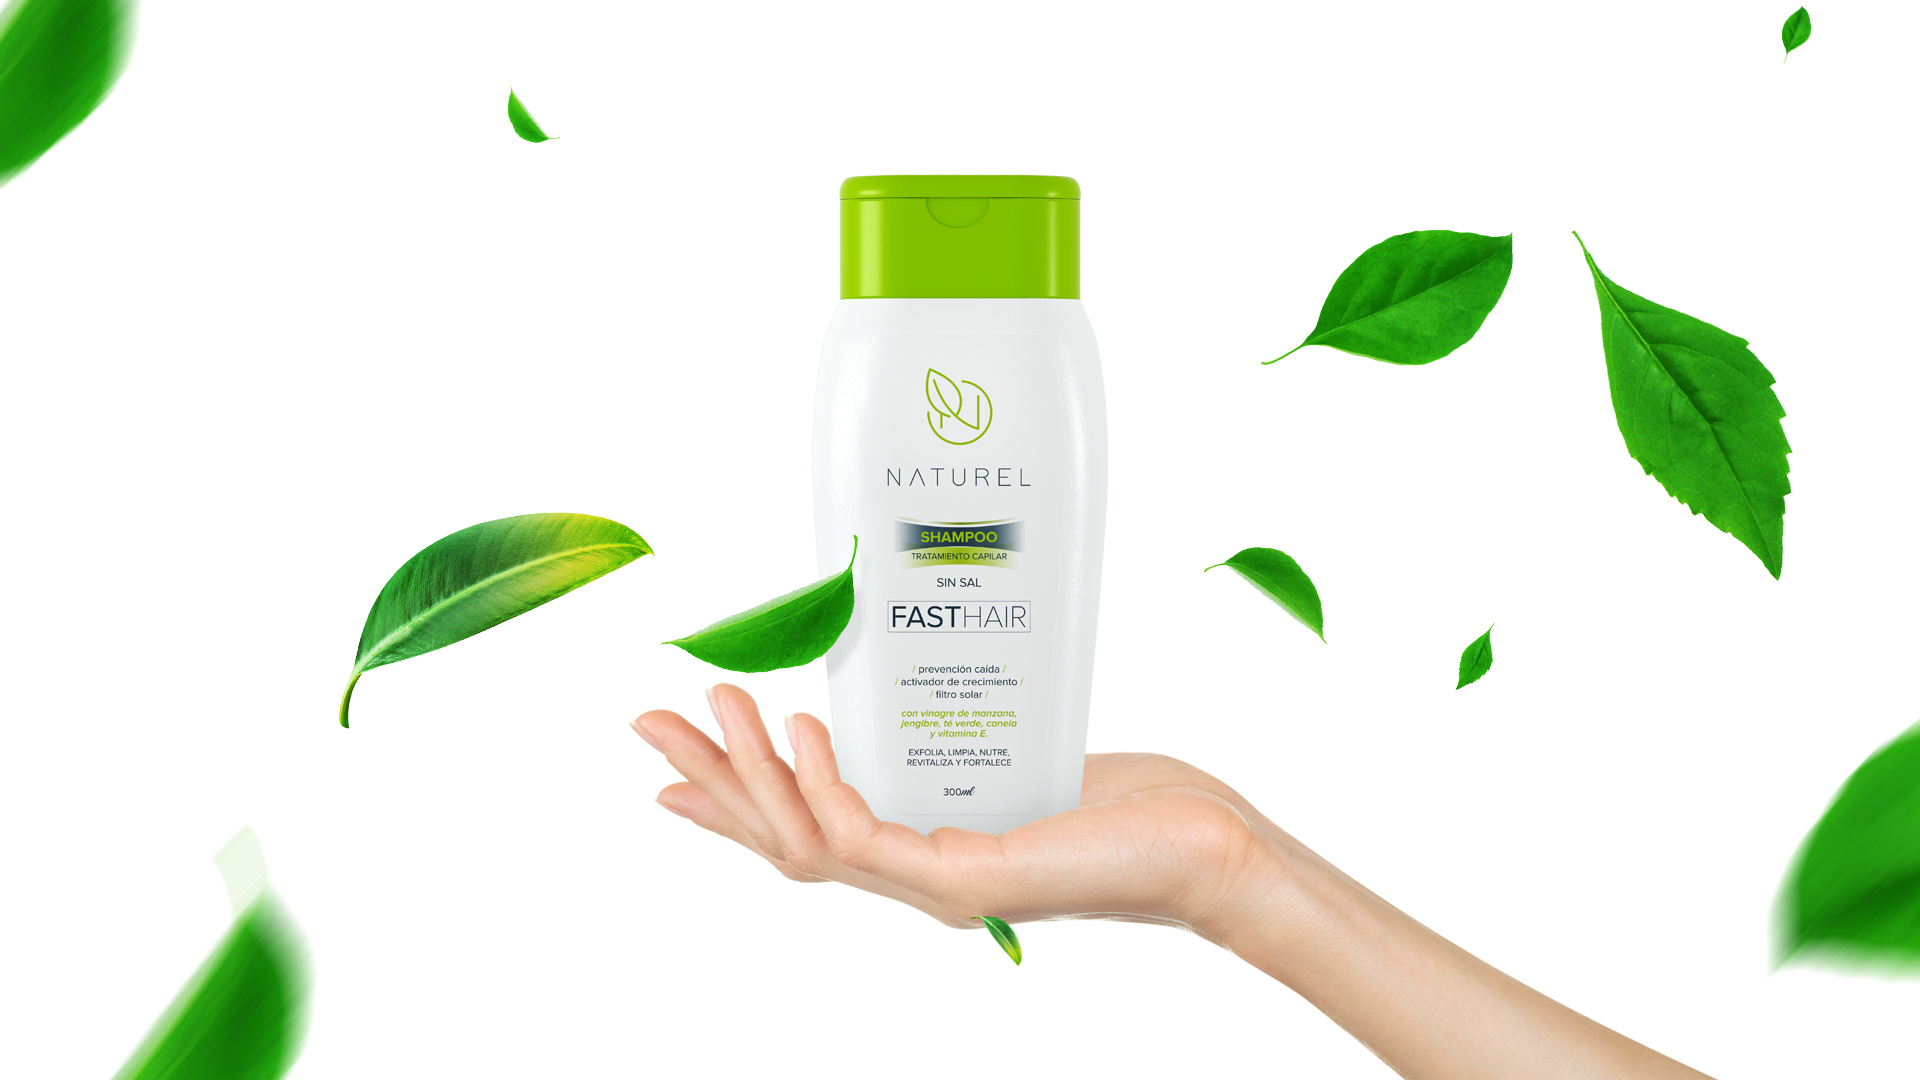 Packaging Design for Naturel Fasthair Products